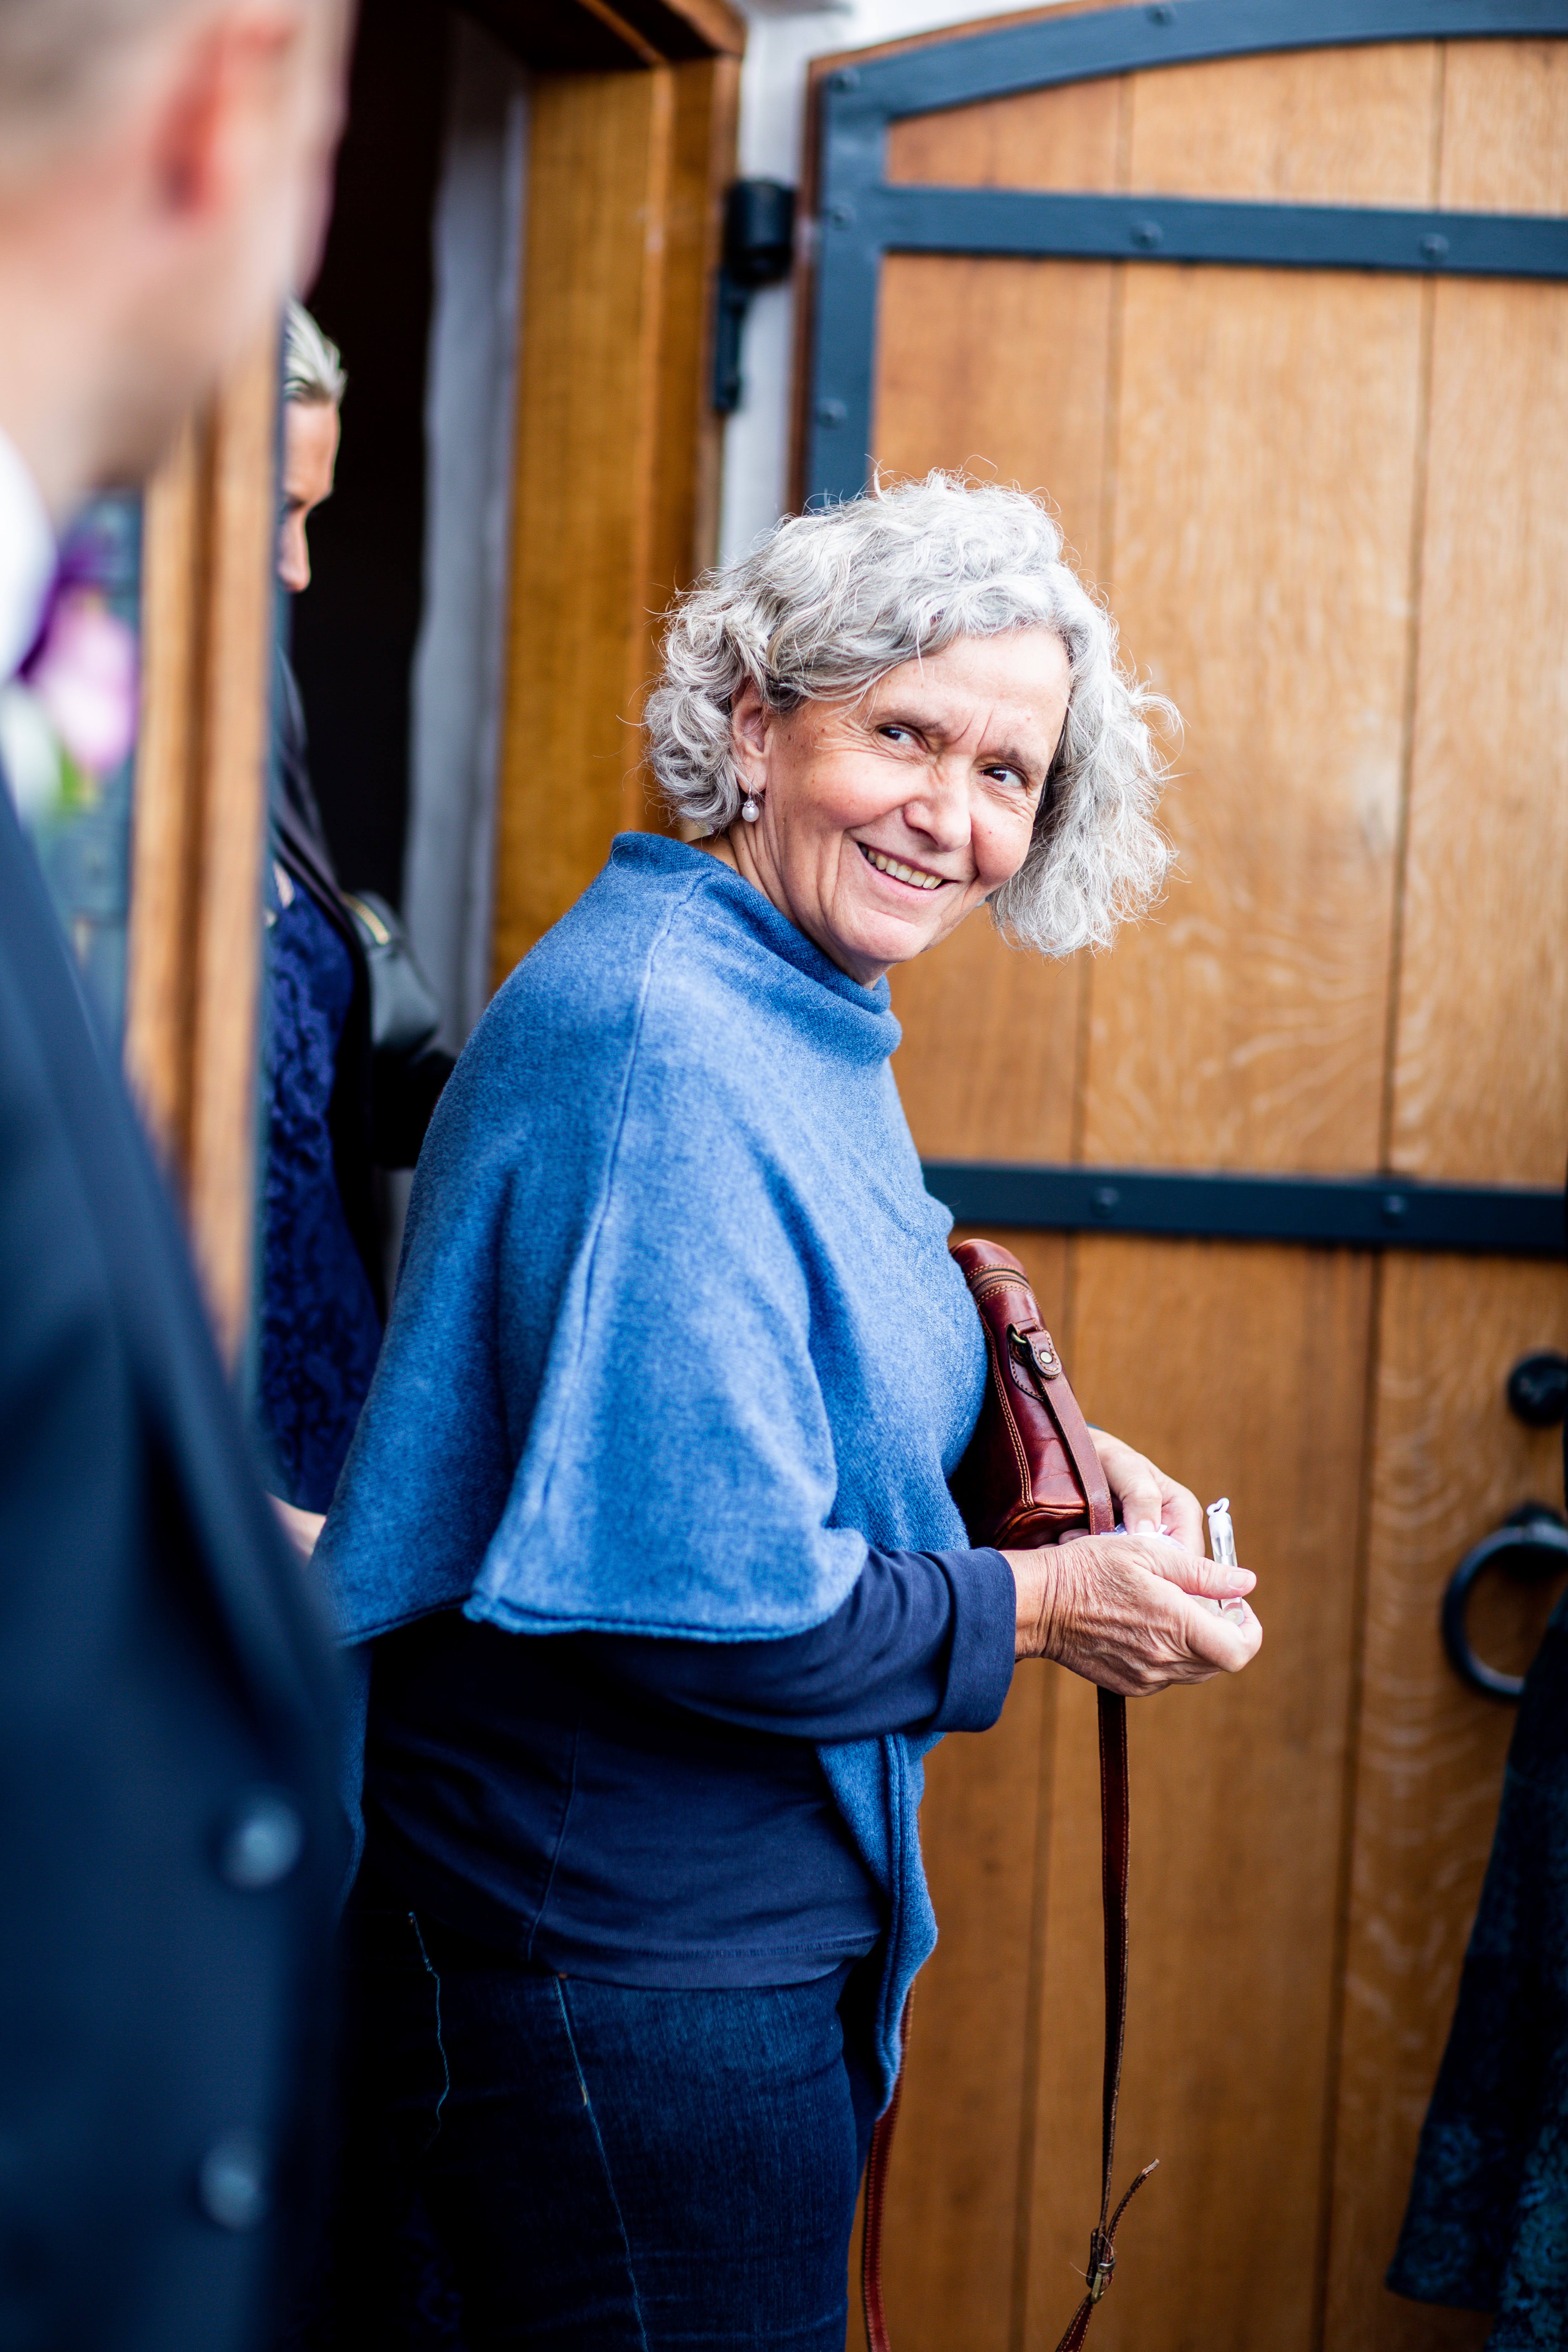 An older woman with a mischievous look on her face | Source: Pexels